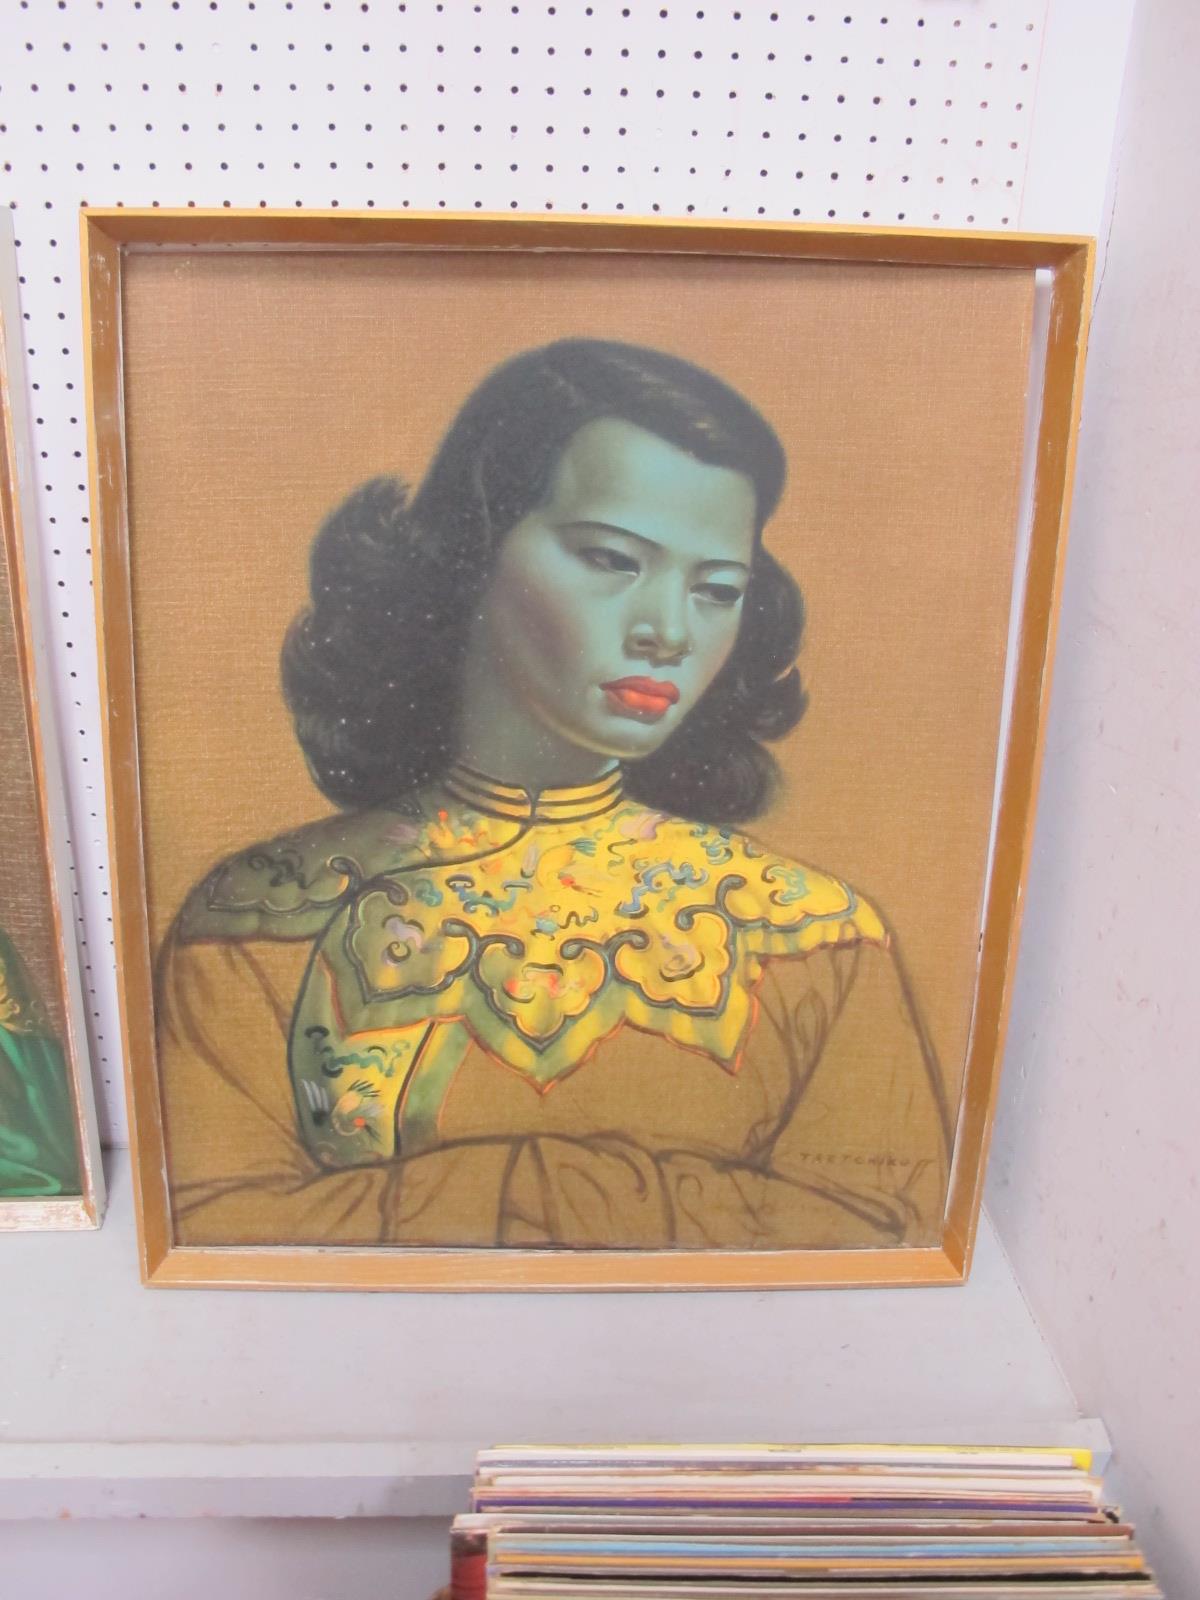 Tretchikoff, Mid XX Century Colour Print of The Chinese Girl, 61 x 50.5cm.